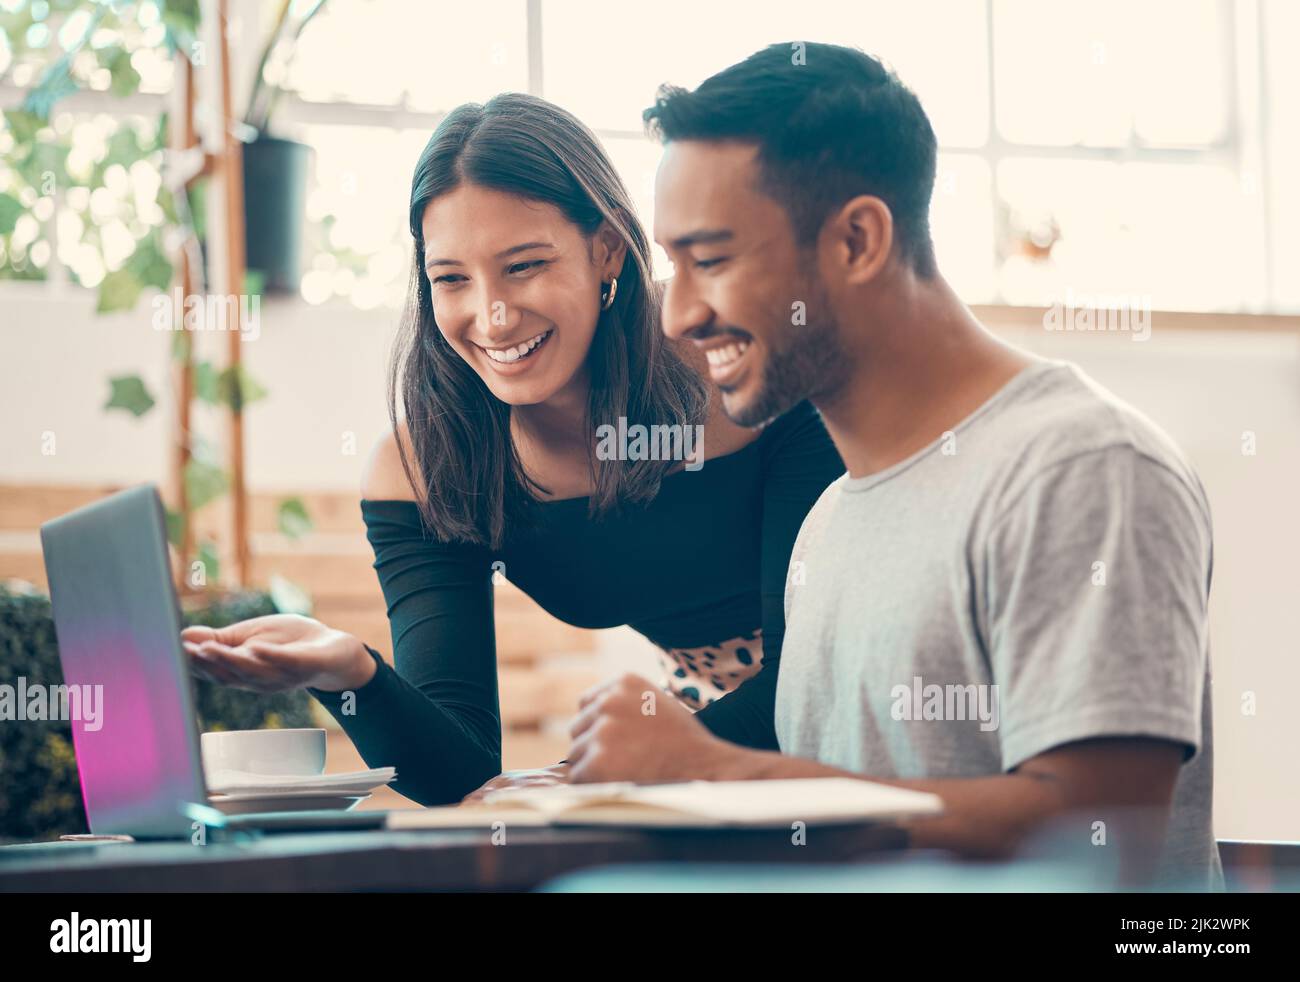 Happy, smiling, cheerful entrepreneurs browsing the internet on a laptop inside a coffee shop. Two latino bloggers sharing ideas and laughing while Stock Photo